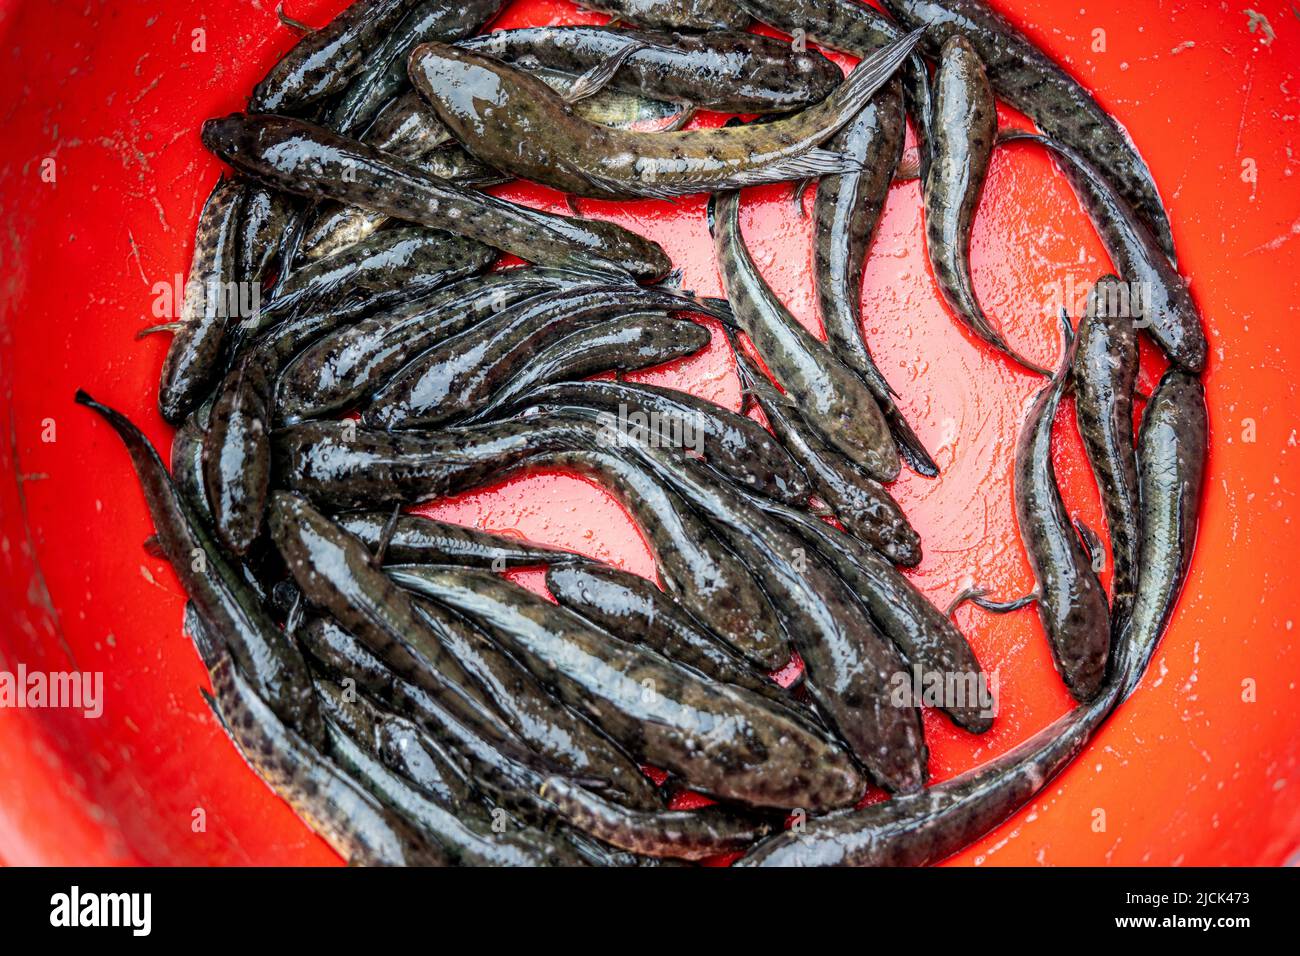 Taki found in rivers and ponds Stock Photo